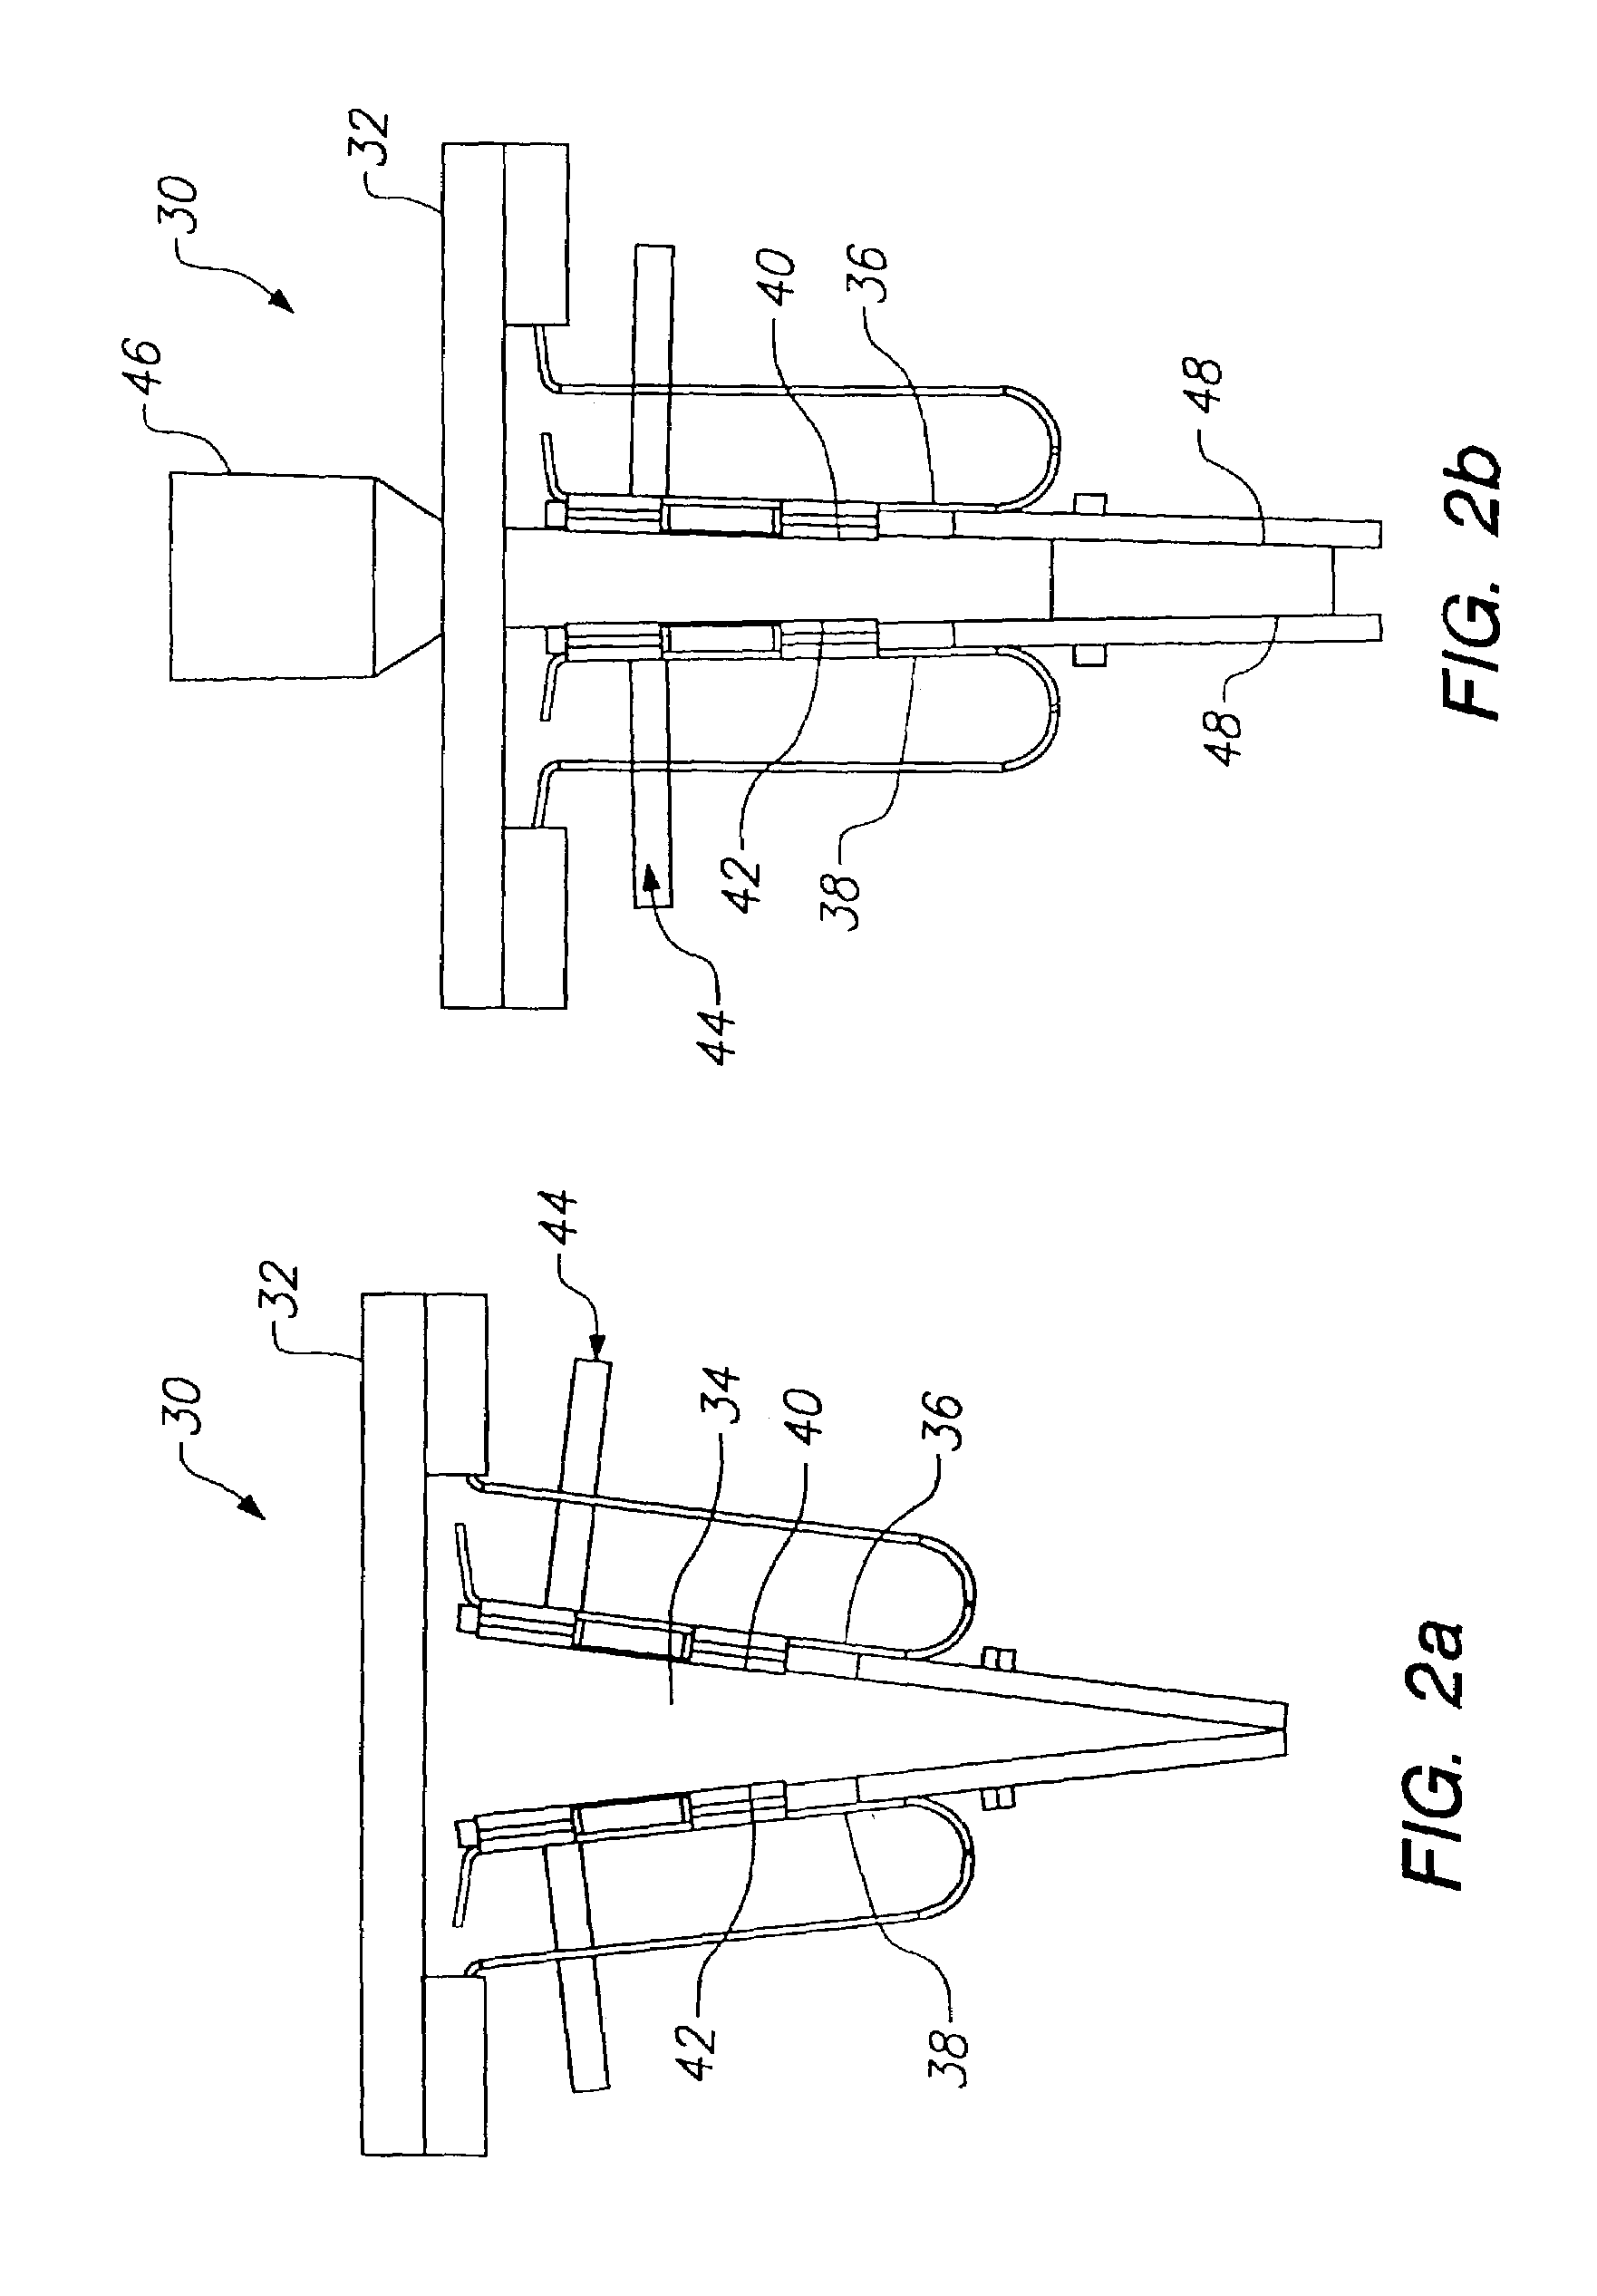 Apparatus and reaction vessel for controlling the temperature of a sample